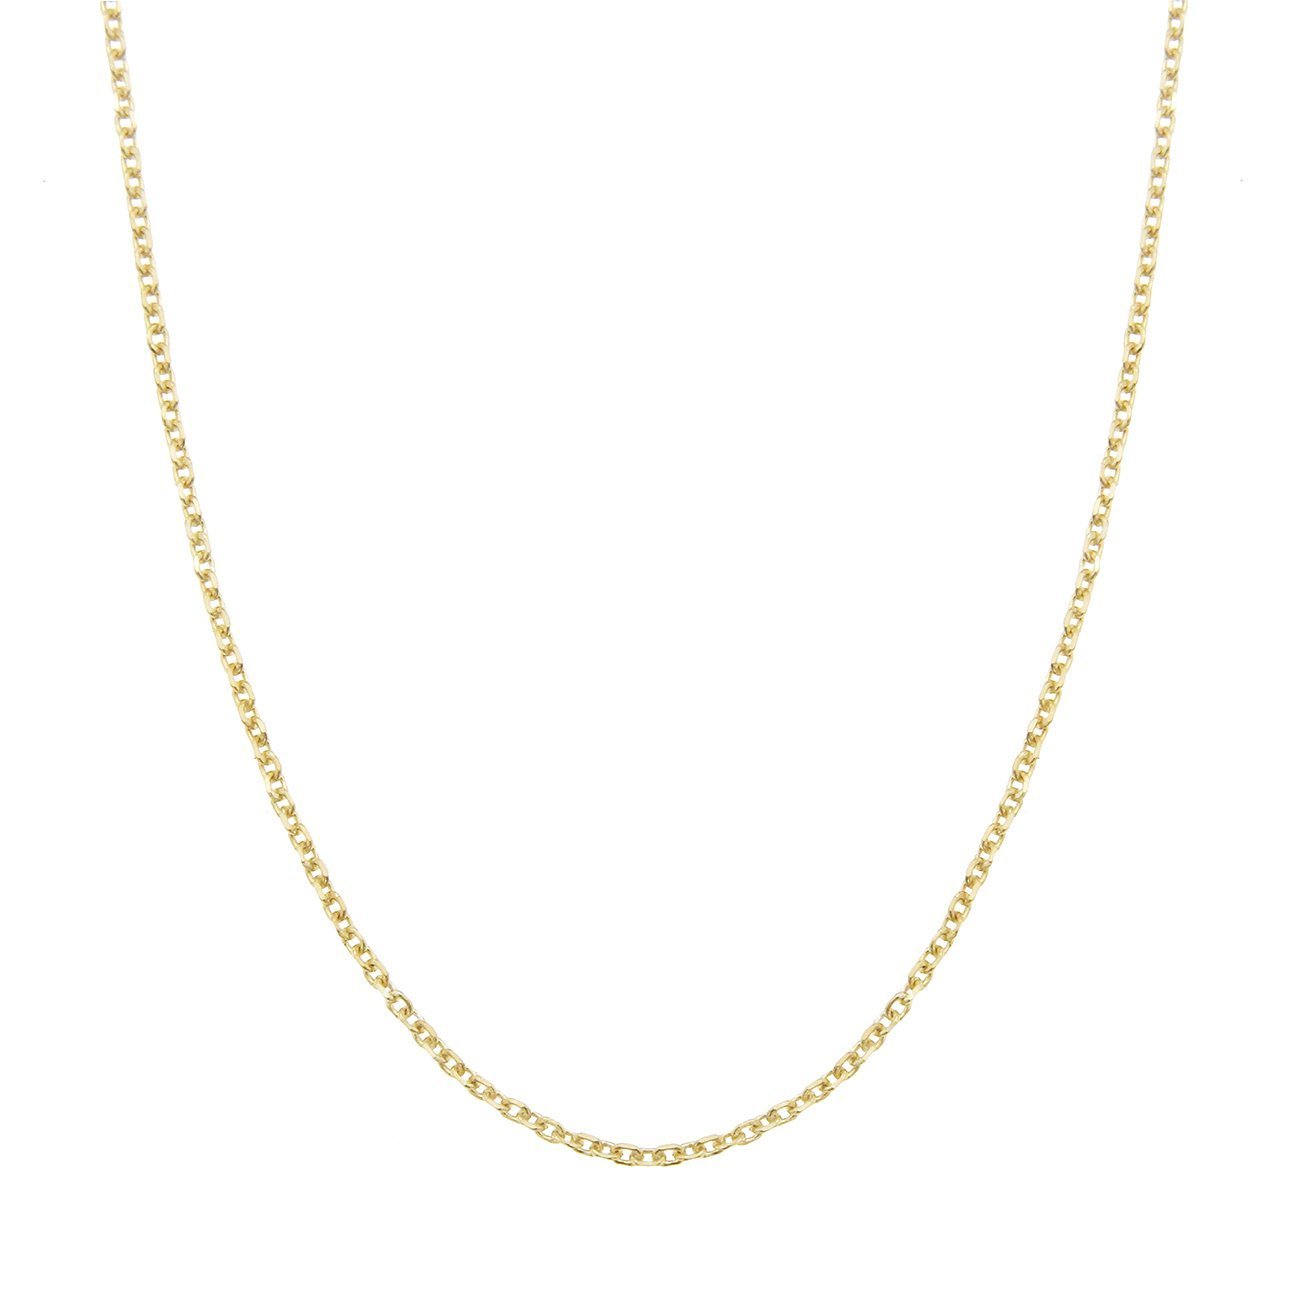 Chain - 18K Gold Plated